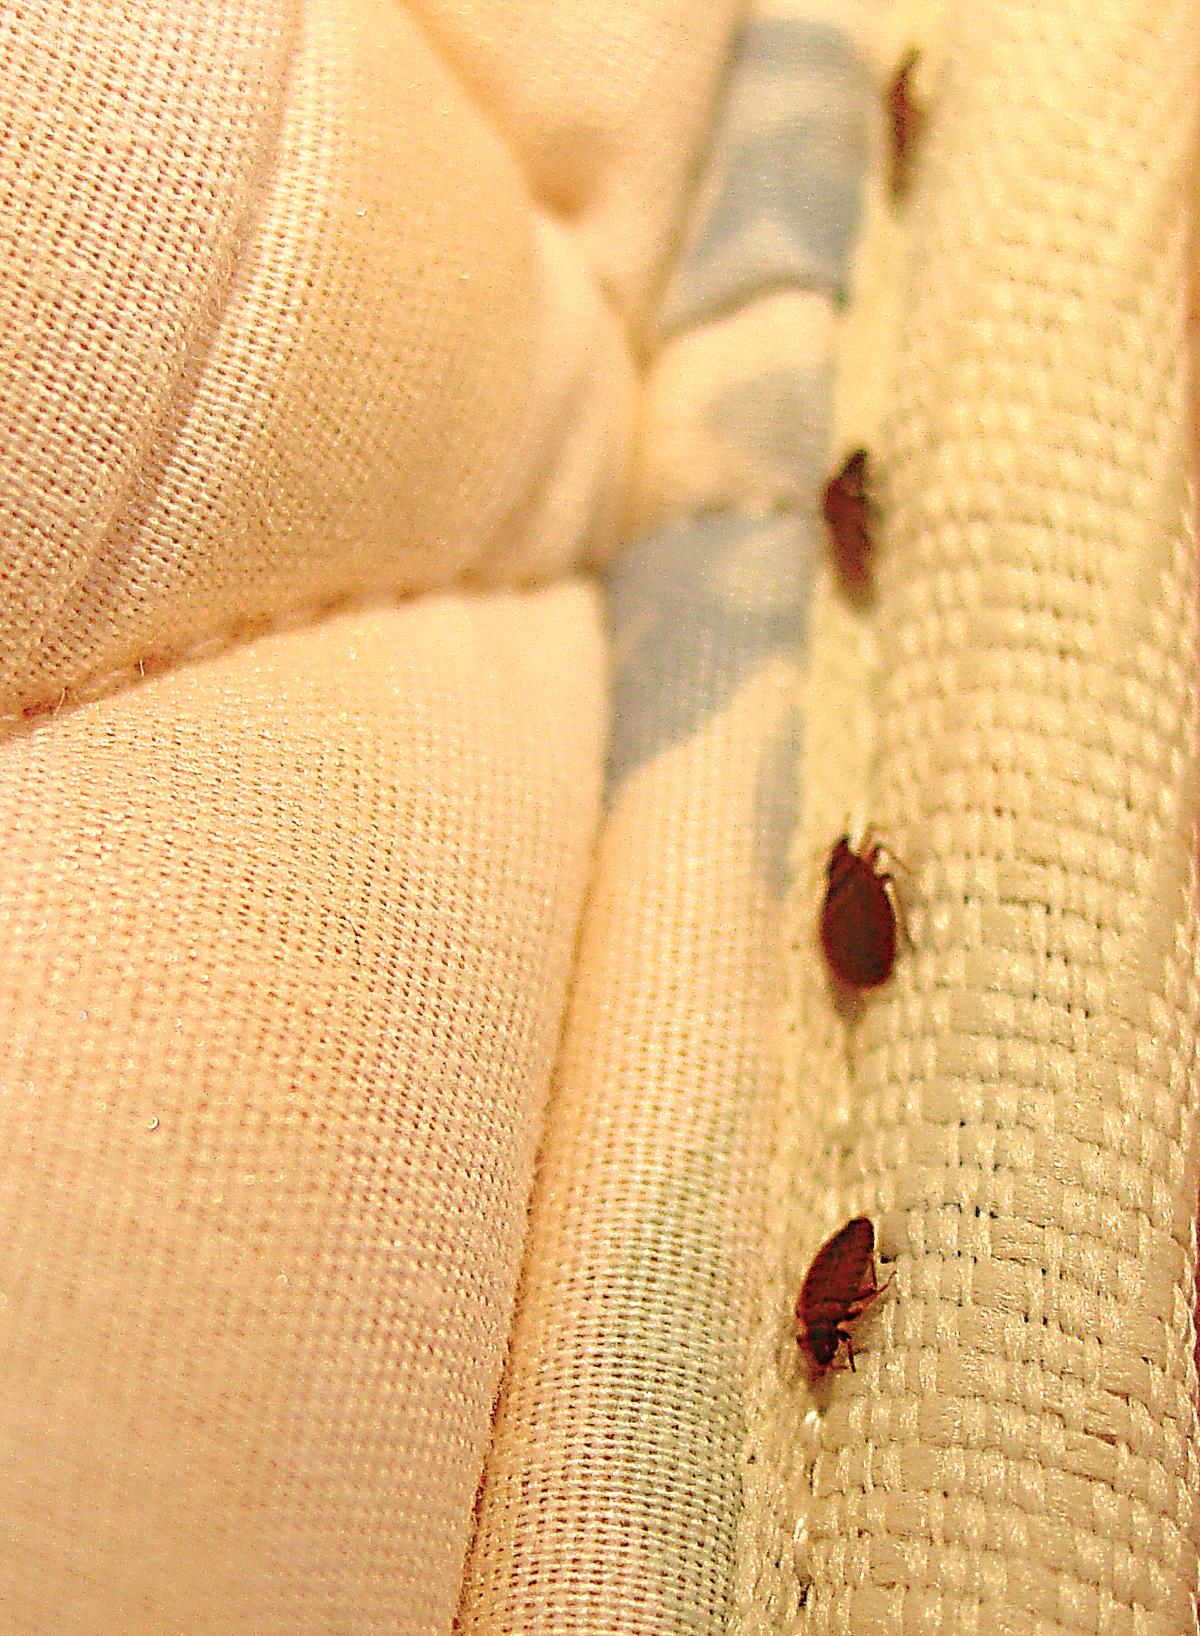 Picture of Bed Bug Infestation Crawling on Mattress Cover